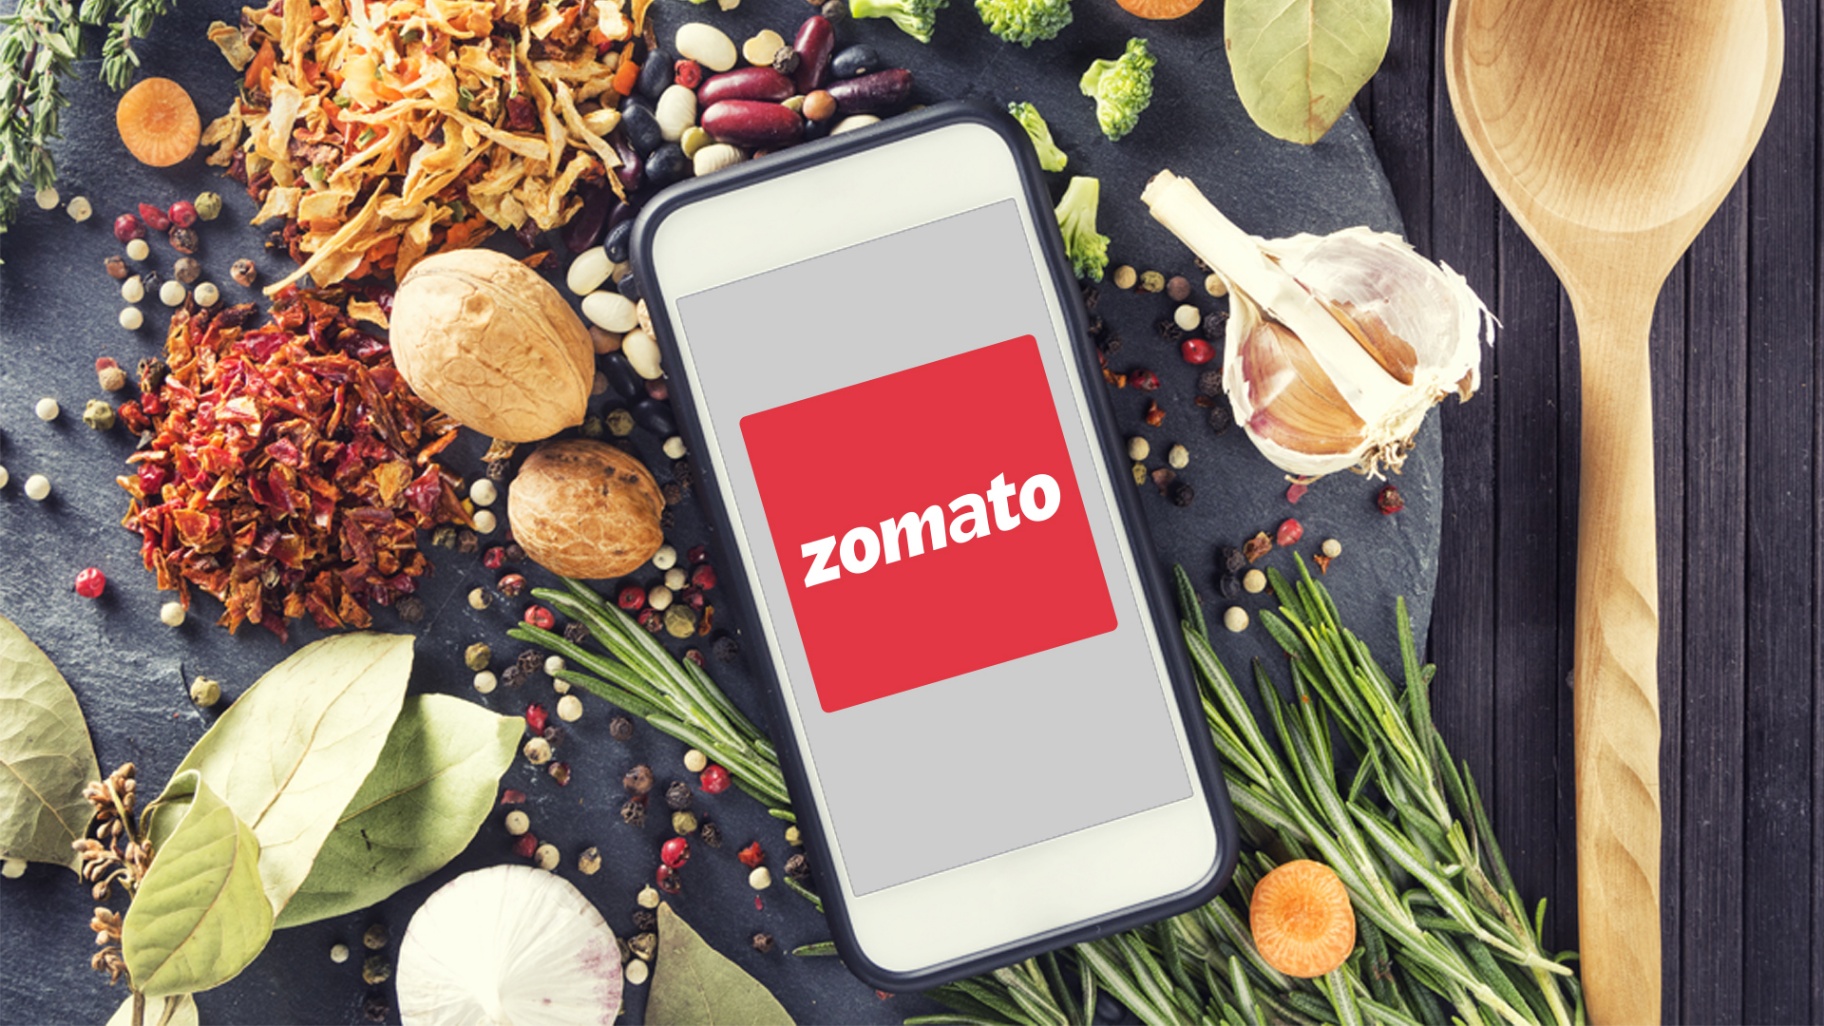 Zomato App - Discover the Best Food Delivery App